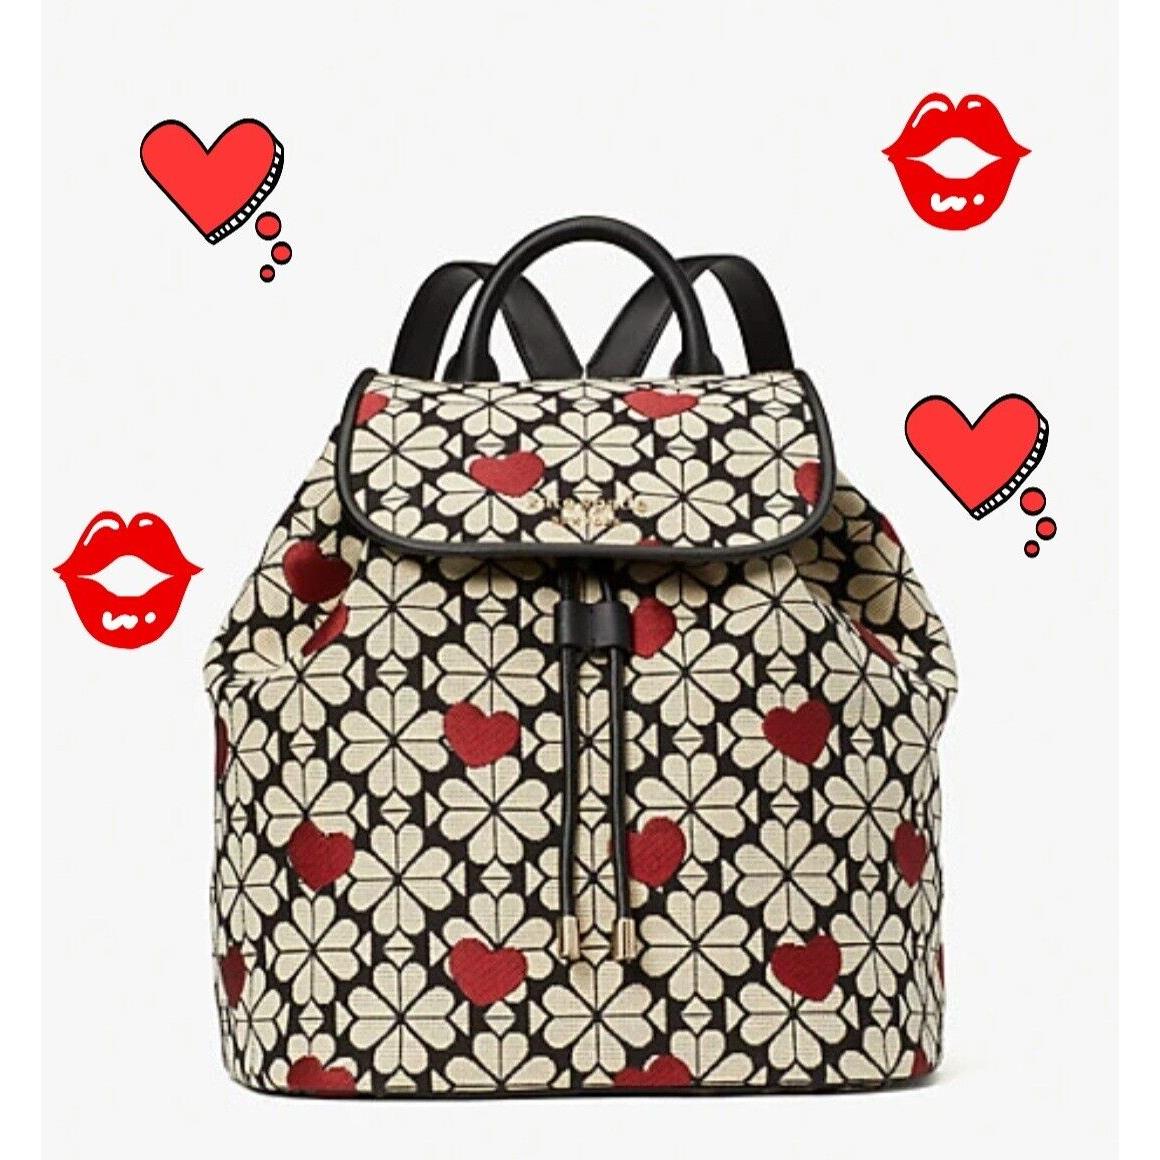 Valentines Day- New Kate Spade Heart Flower Backpack